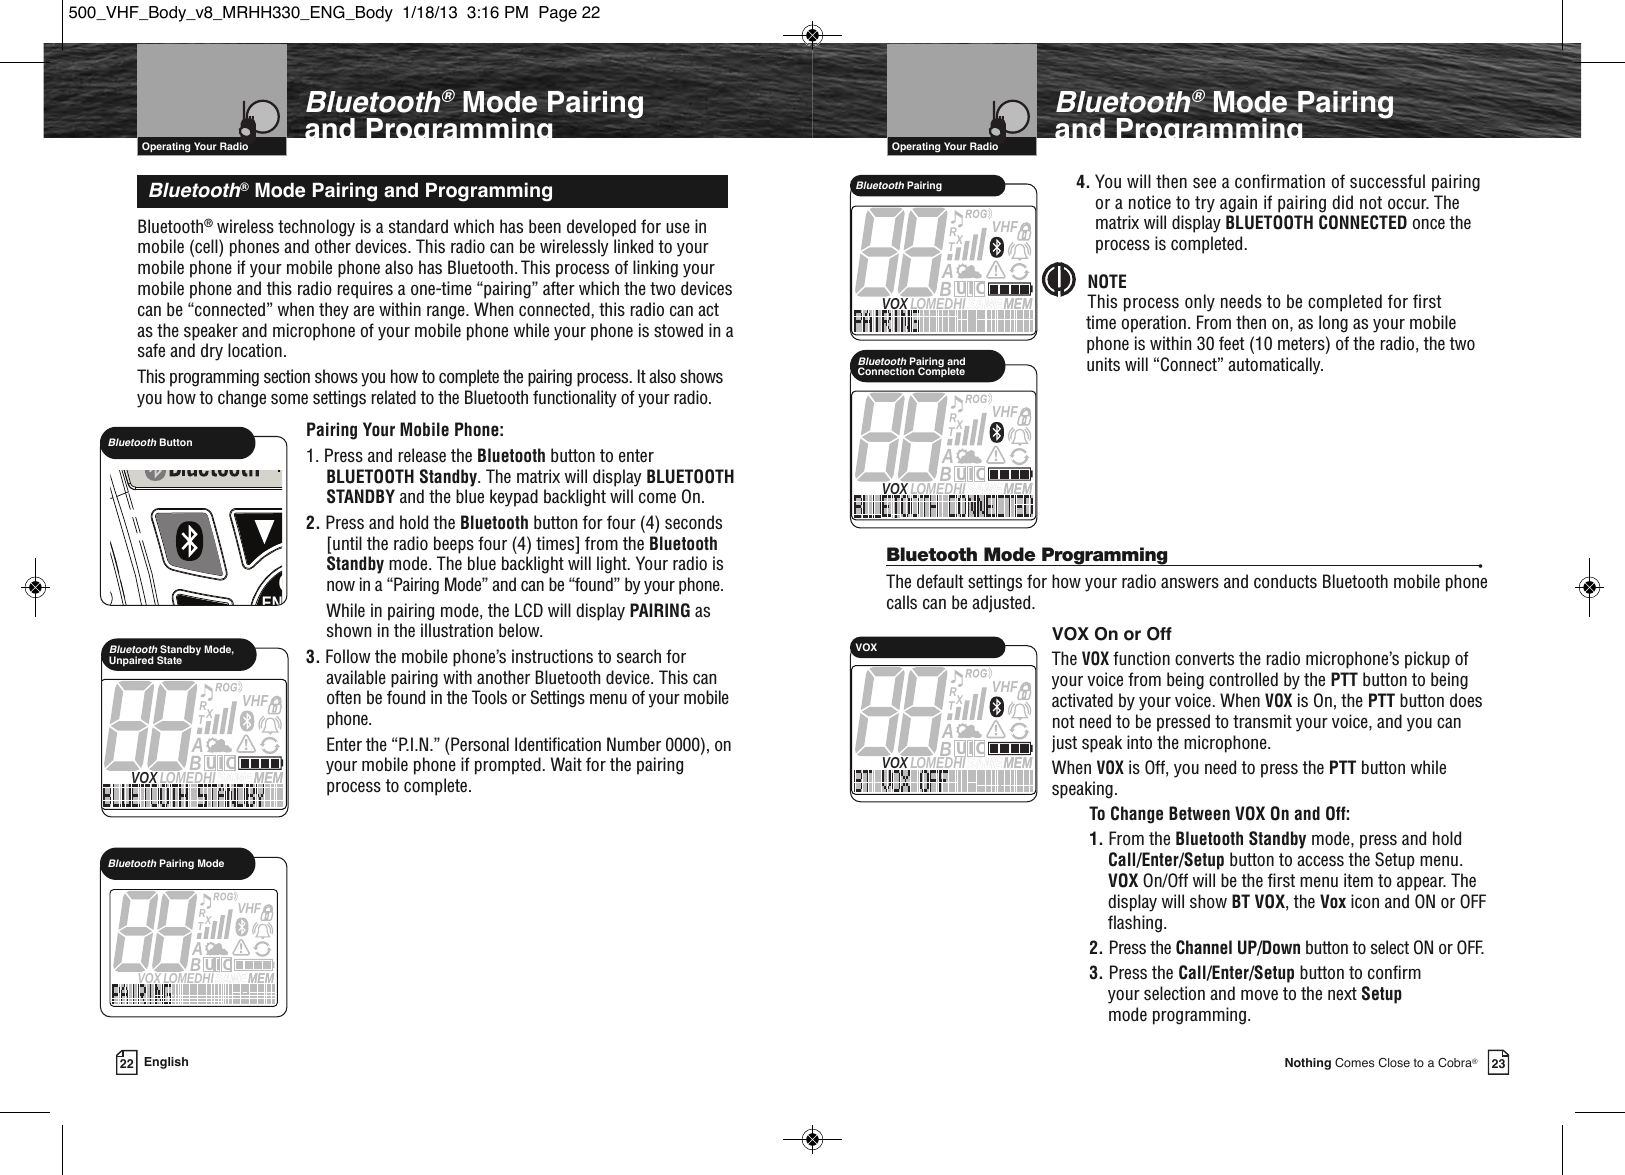 Page 14 of Cobra Electronics MRHH500 BT ACCESSORY IN MARINE RADIO User Manual MRHH330 ENG Body